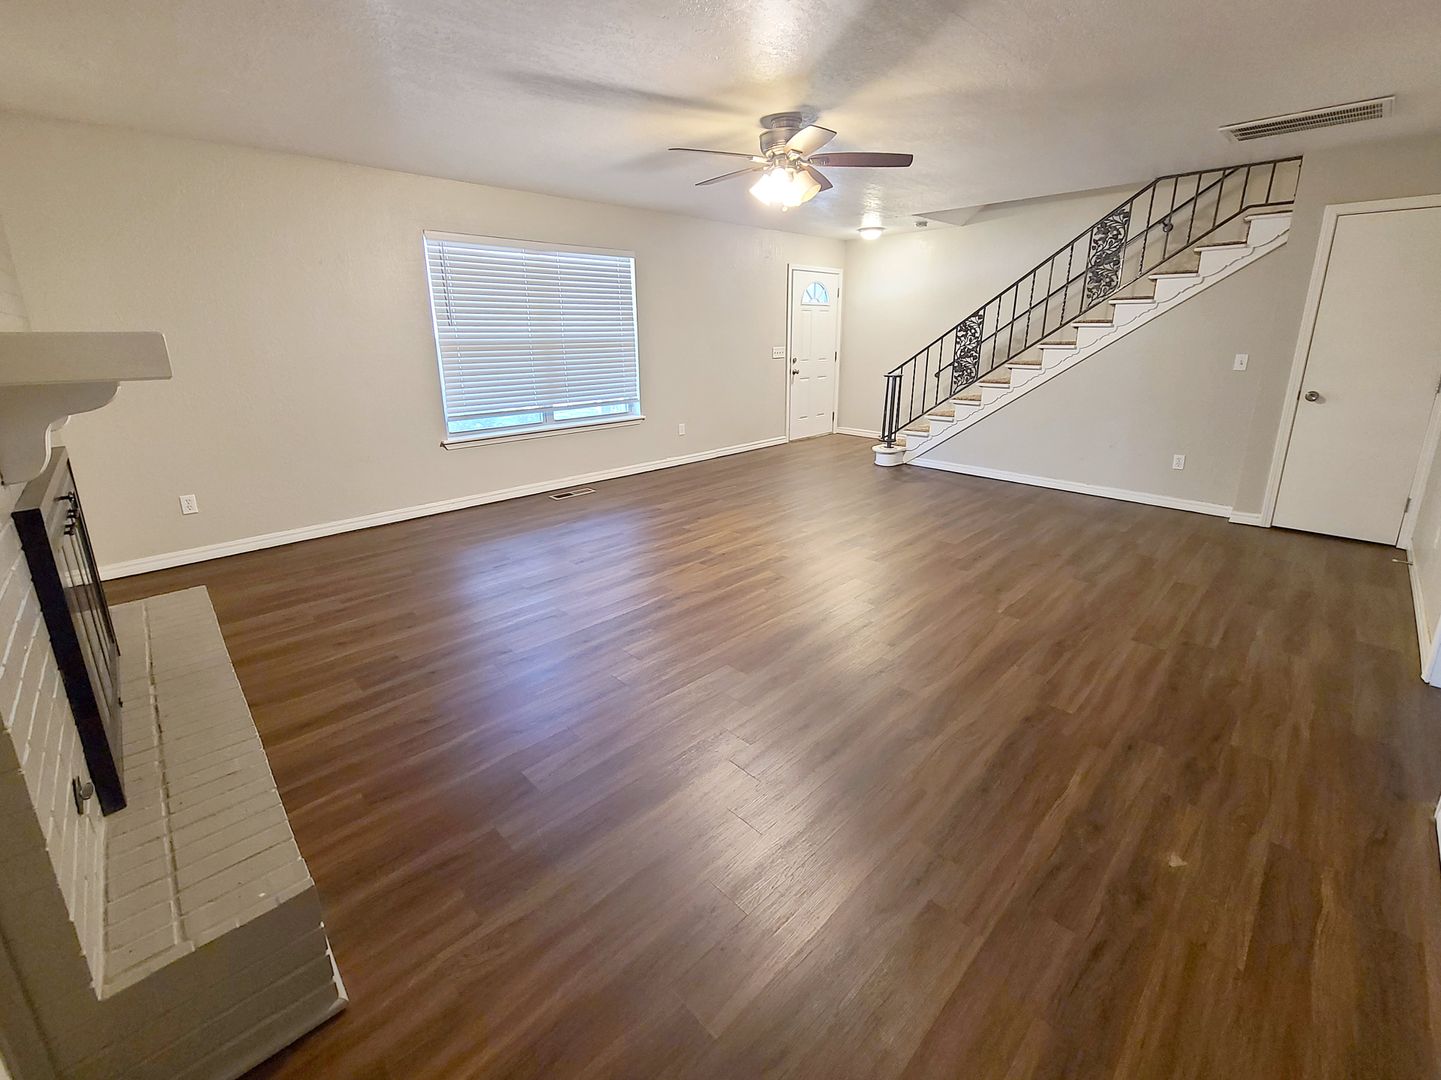 Spacious Duplex in Heart of NW OKC